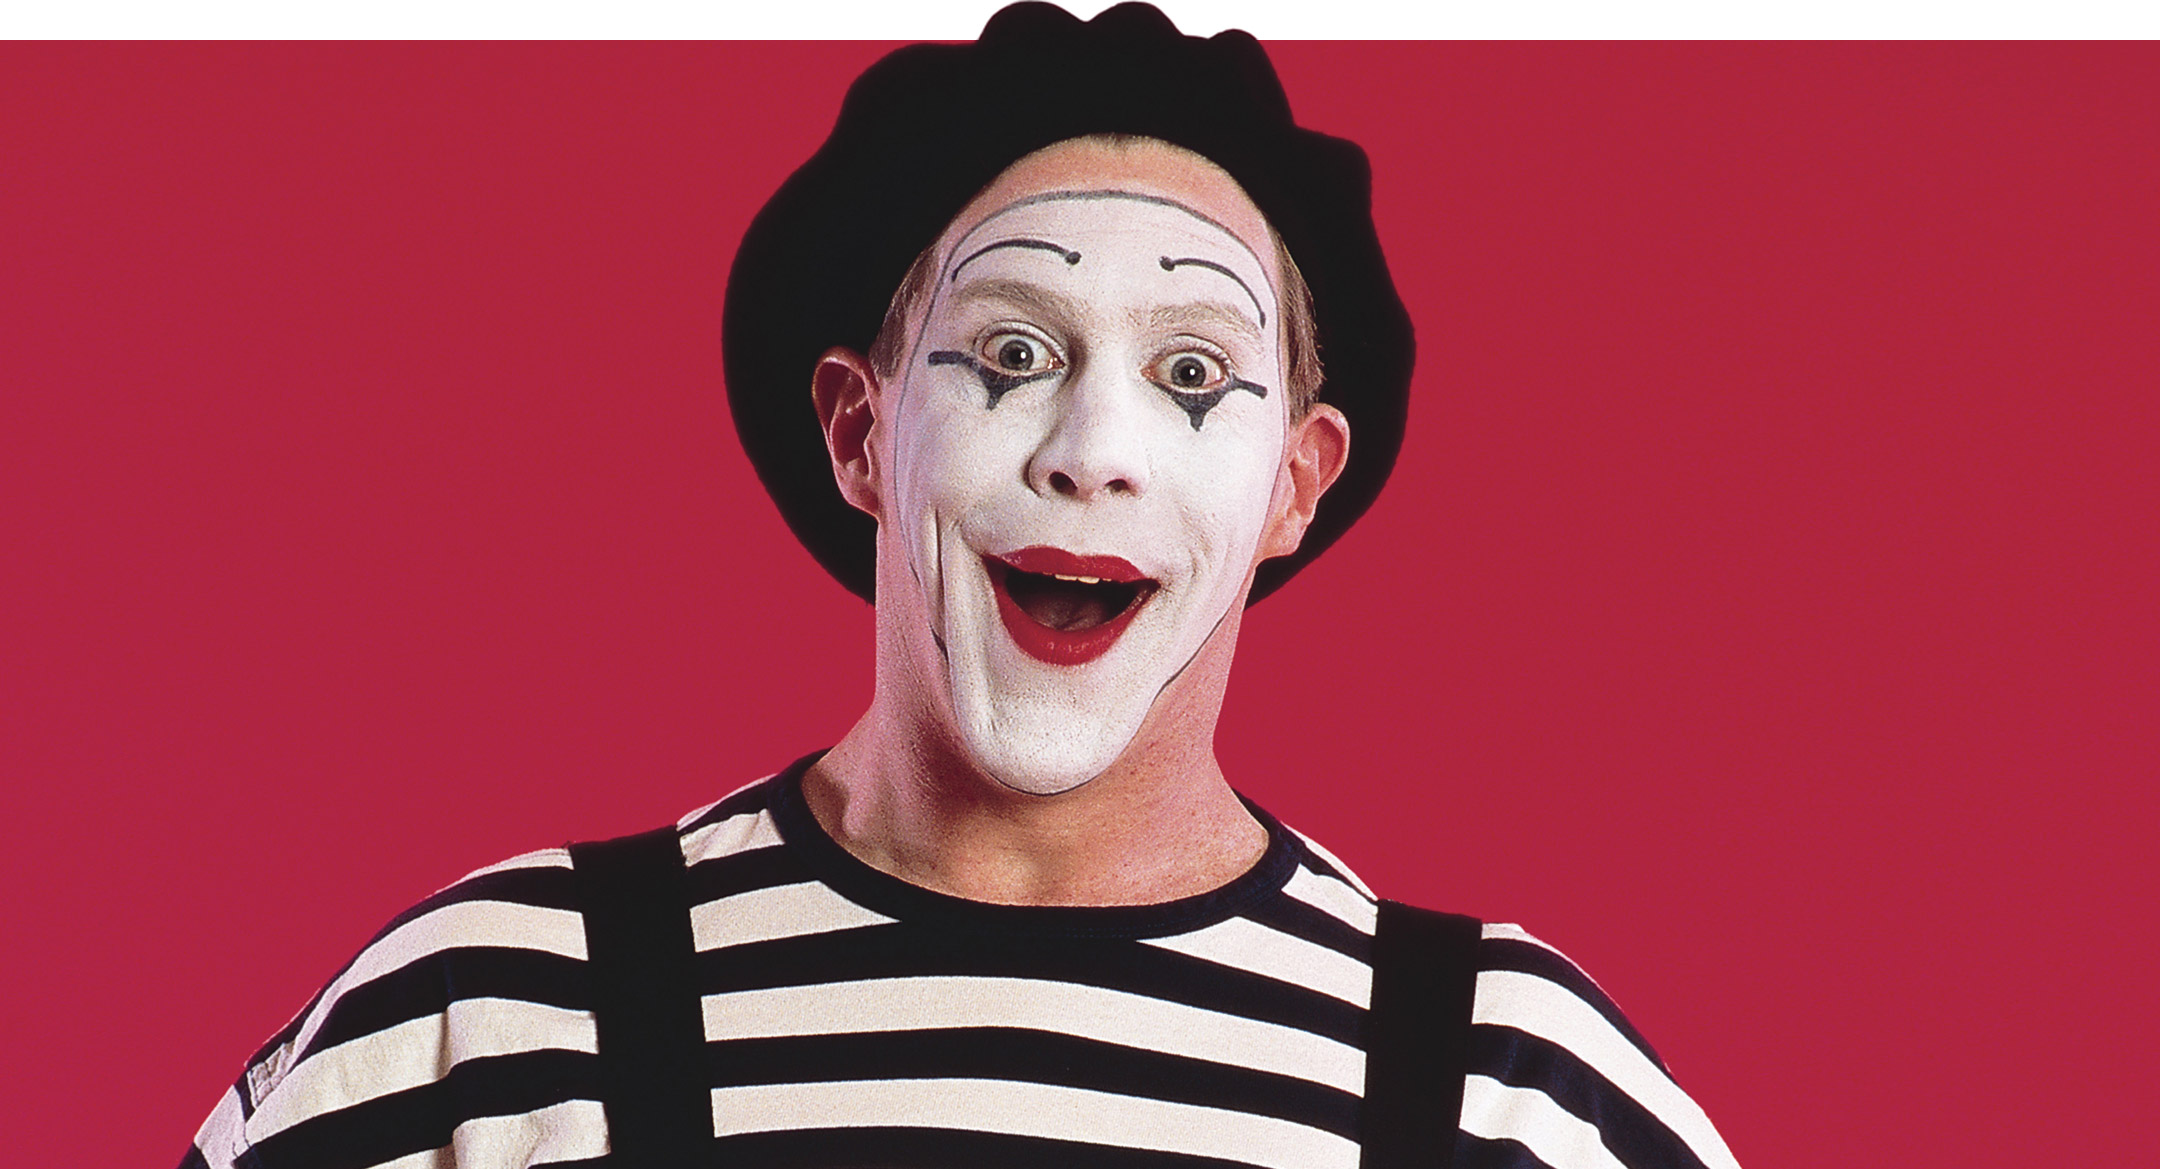 Professional mime for event